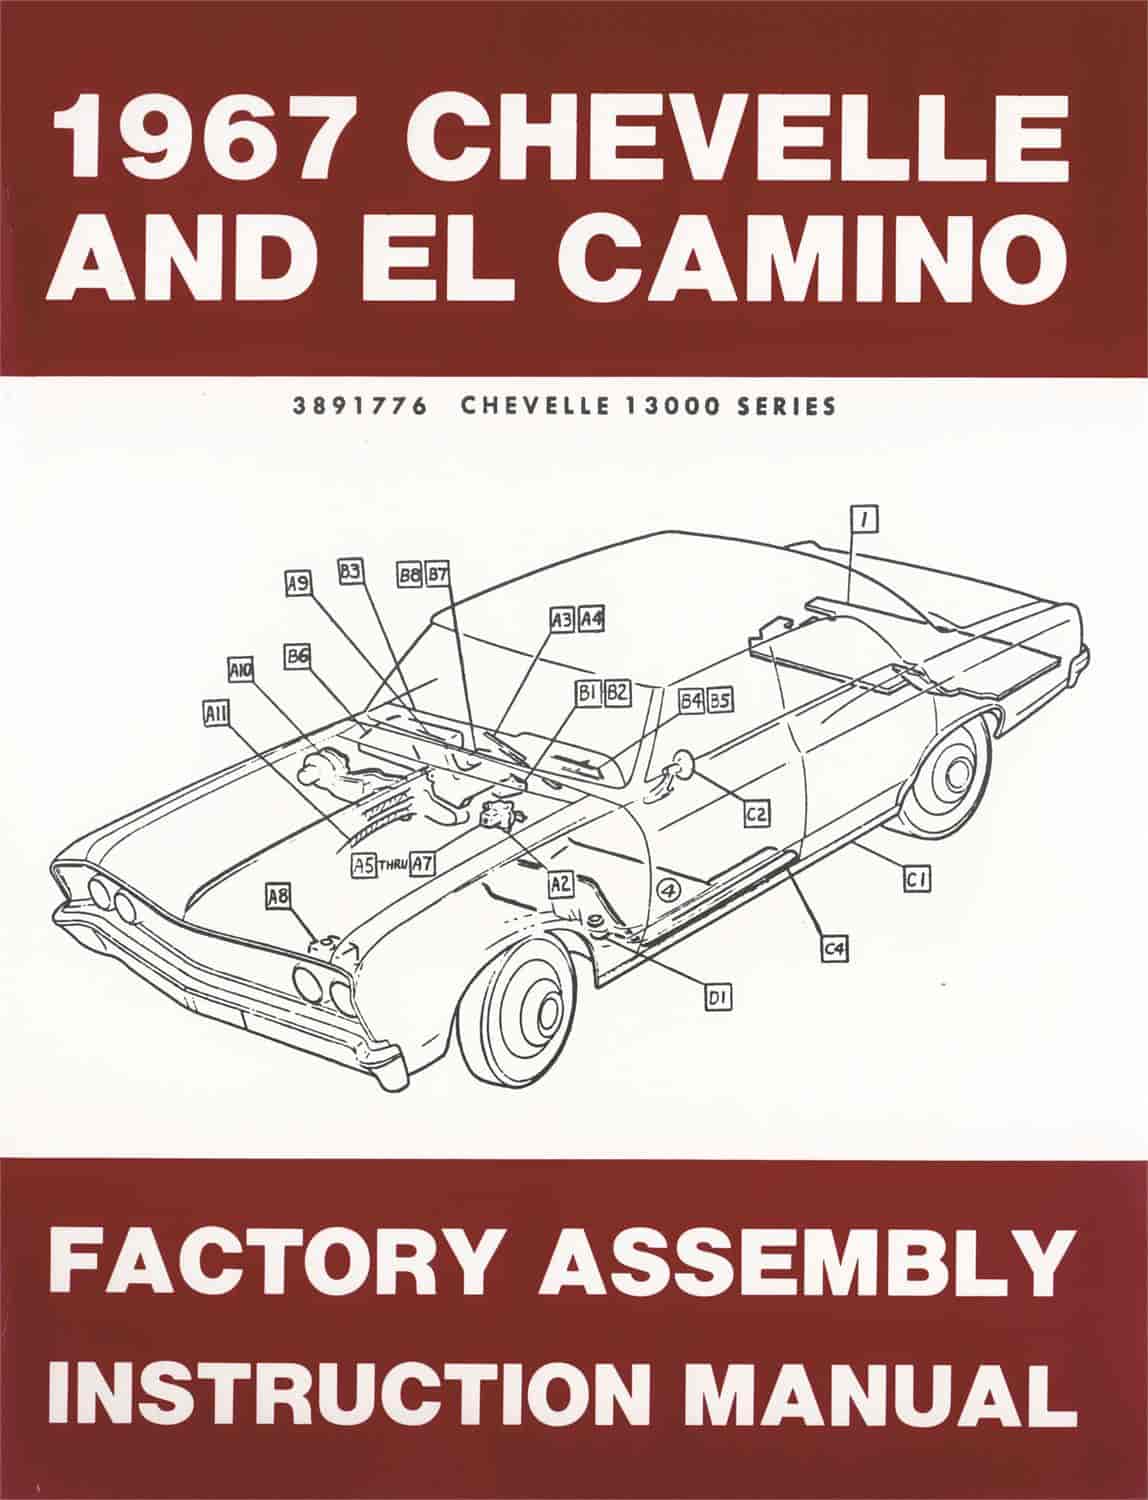 Factory Assembly Manual 1967 Chevy Chevelle & El Camino